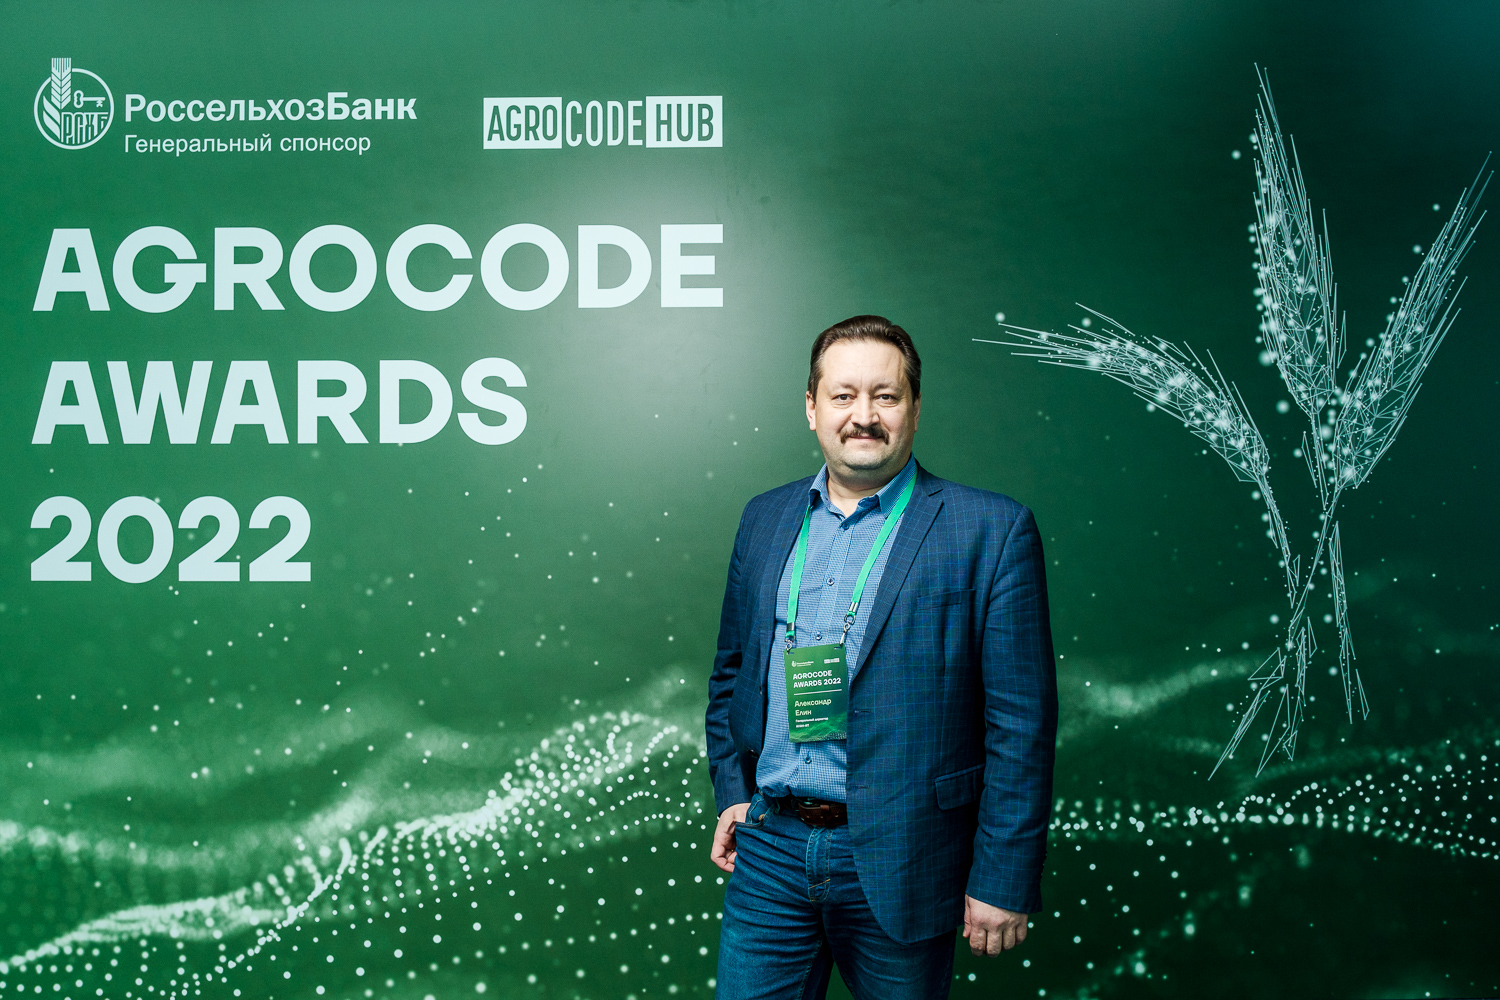 ALAN-IT reached the final of the AgroCode Awards in two categories - S4A